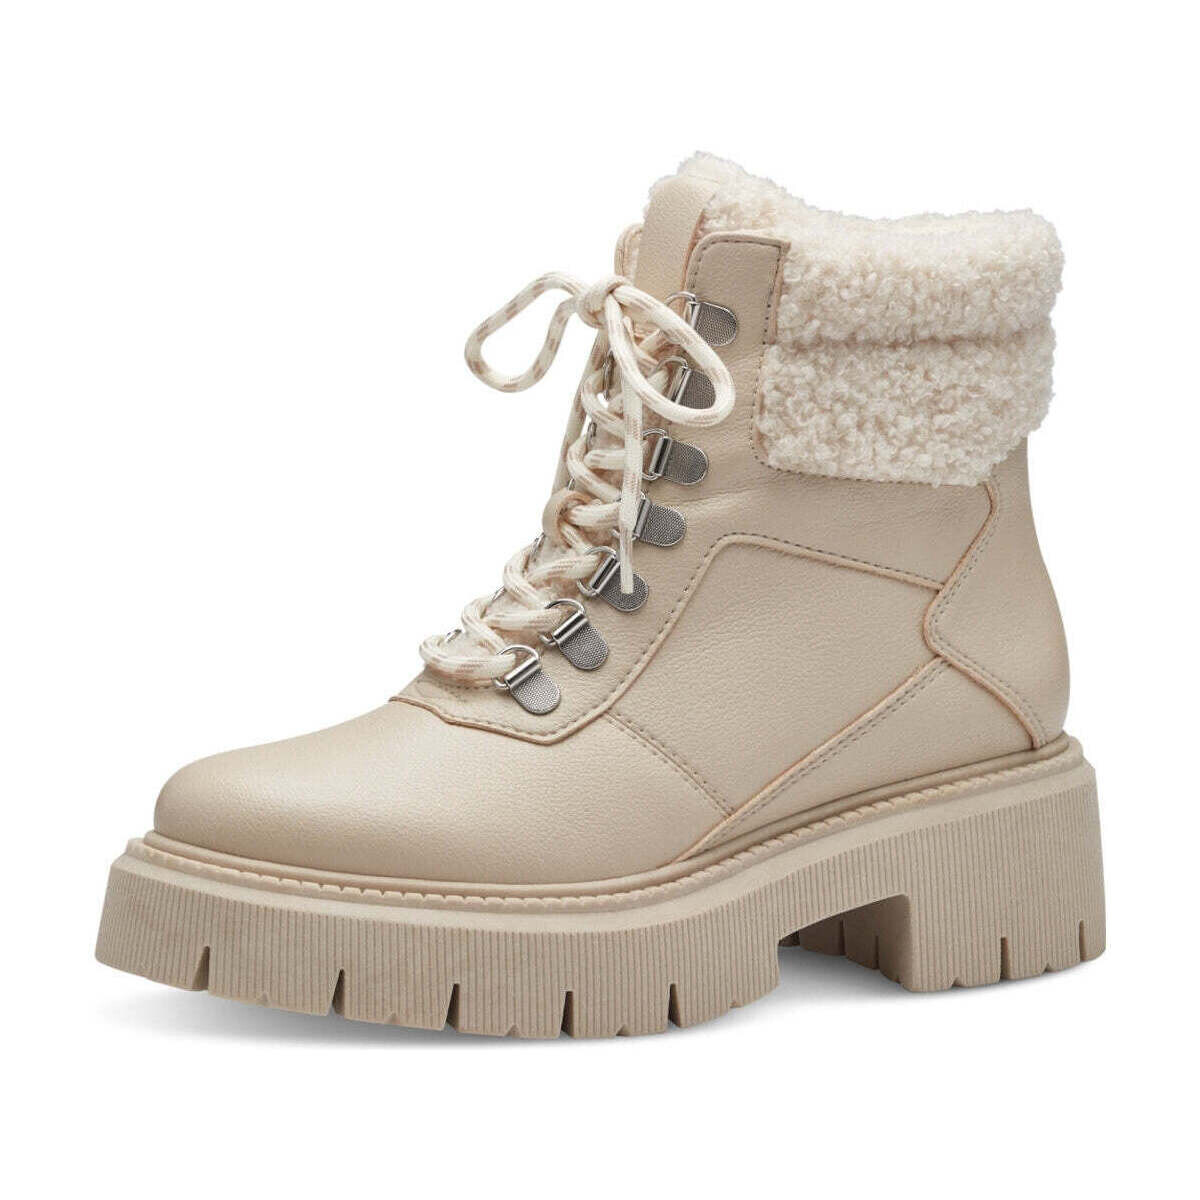 Chaussures Femme Bottines Marco Tozzi toria booties Beige